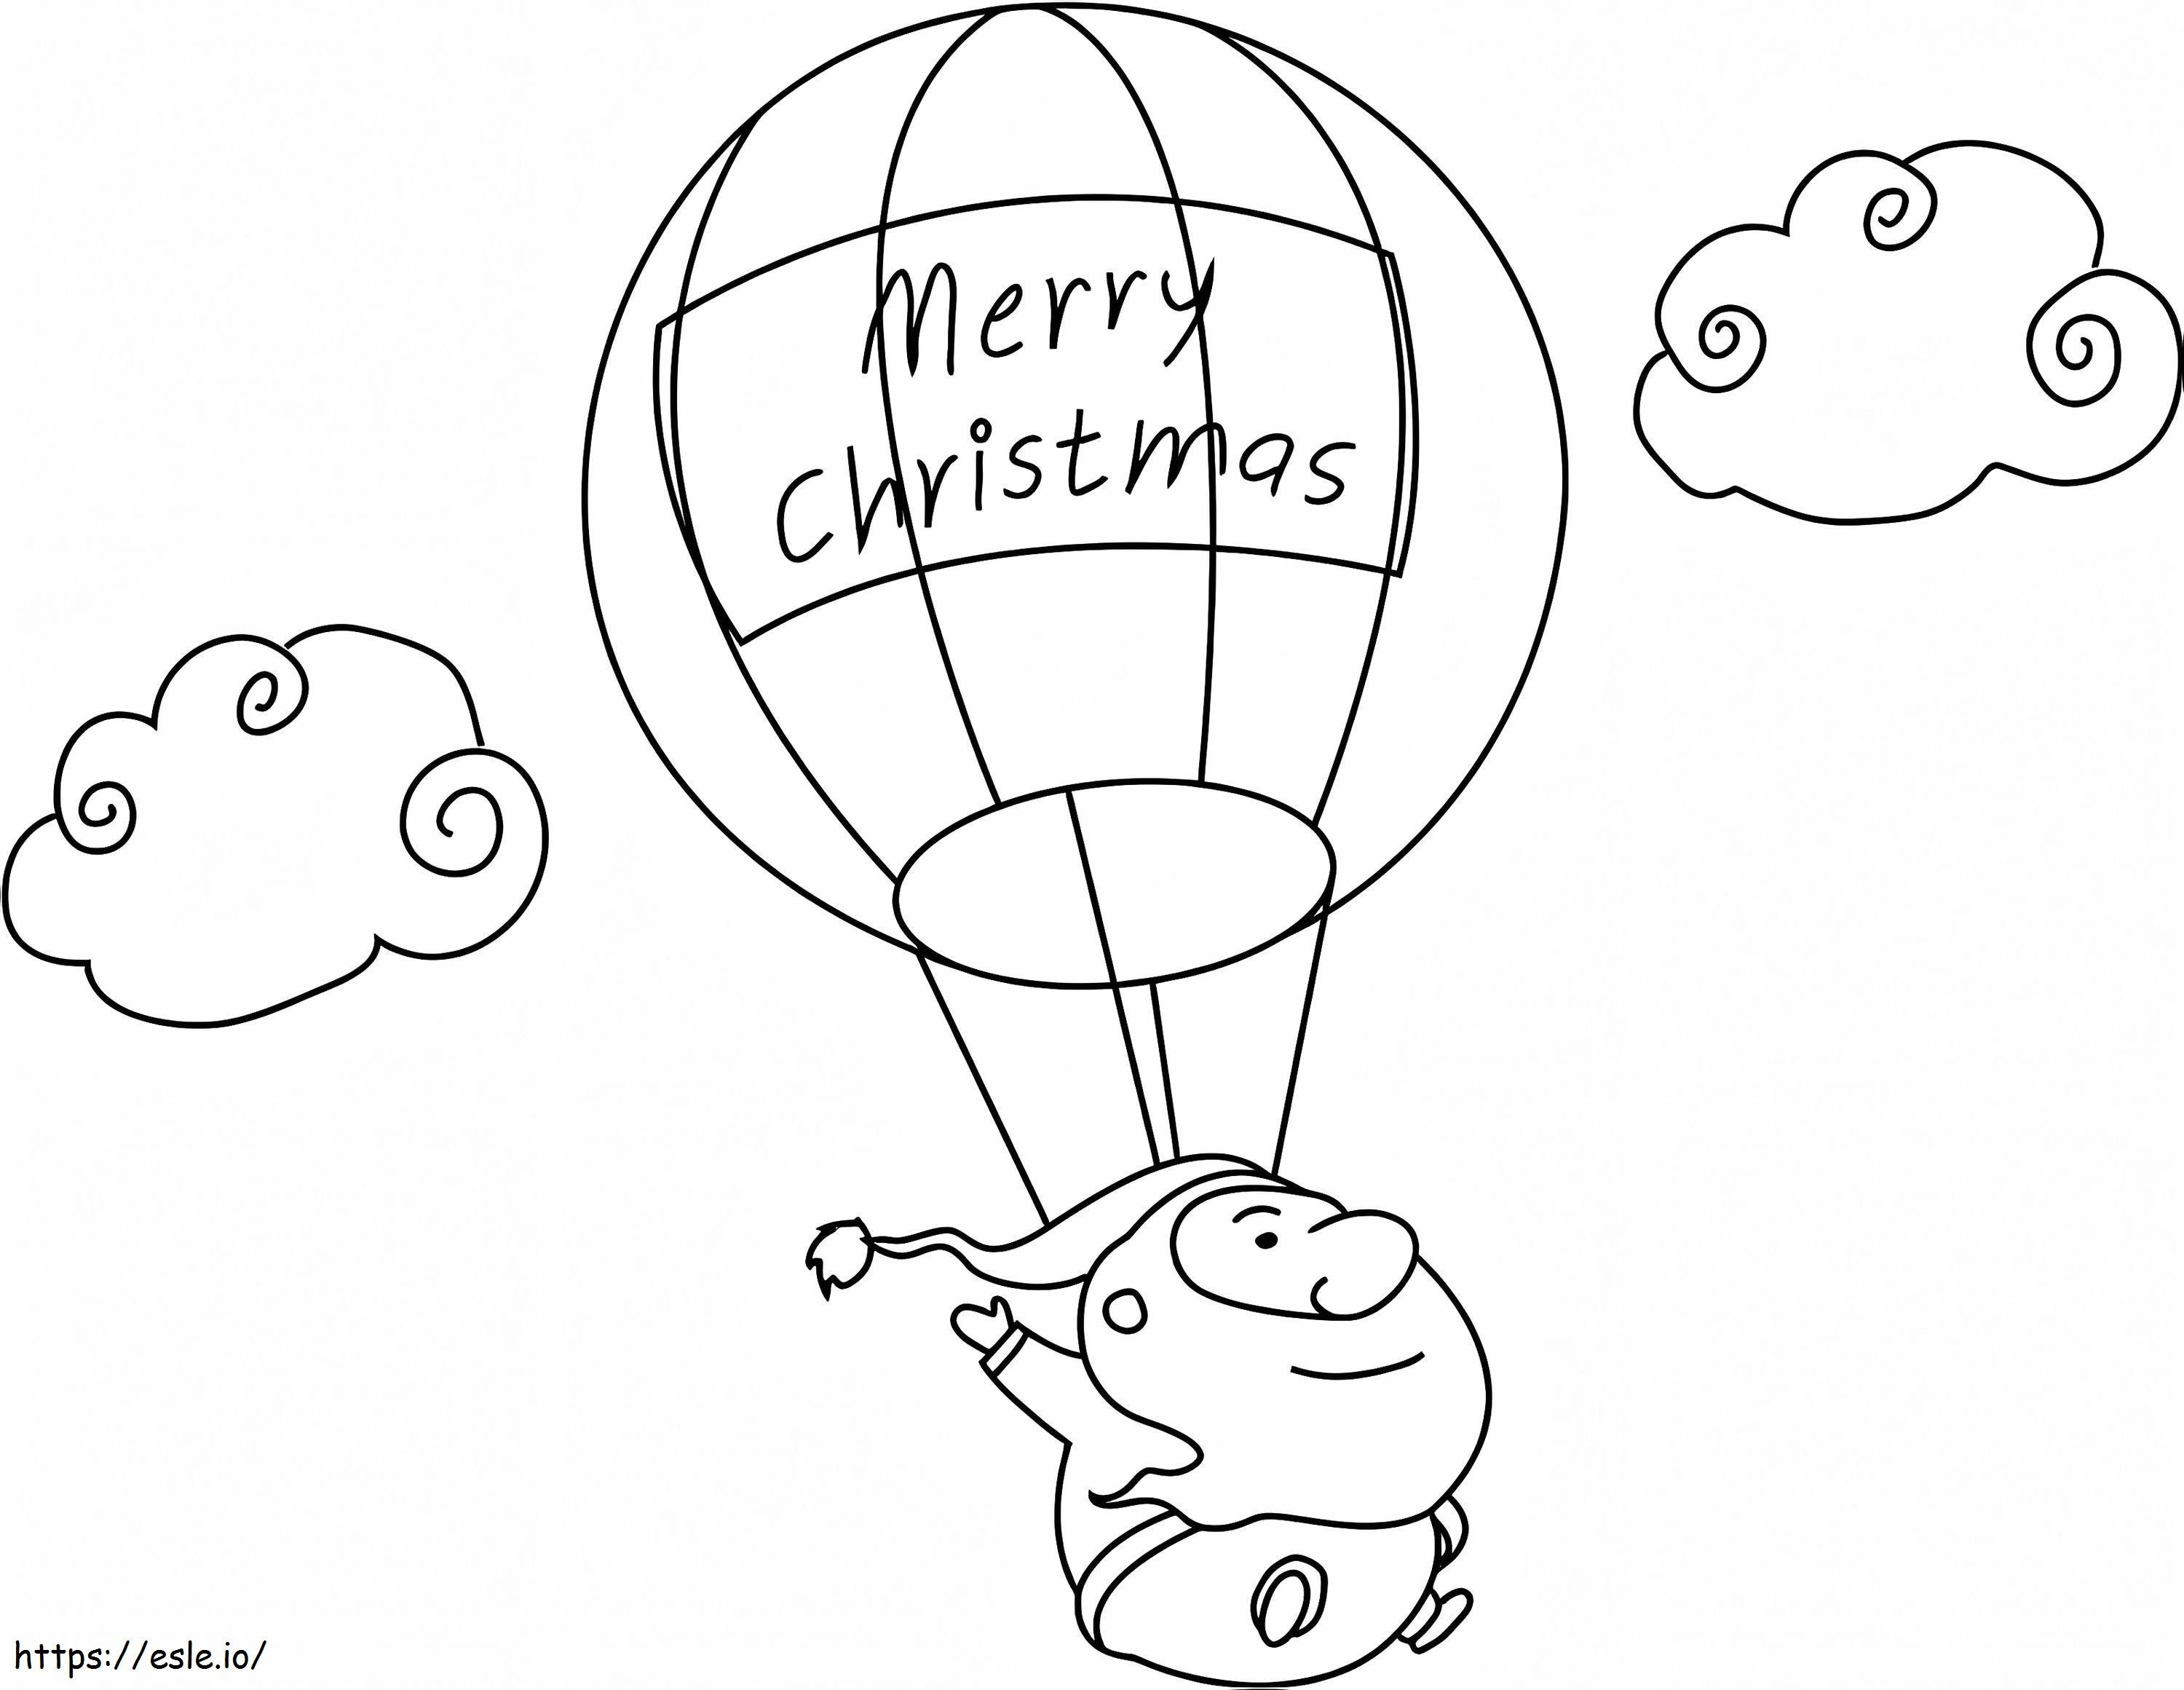 Santa Claus On The Globe coloring page